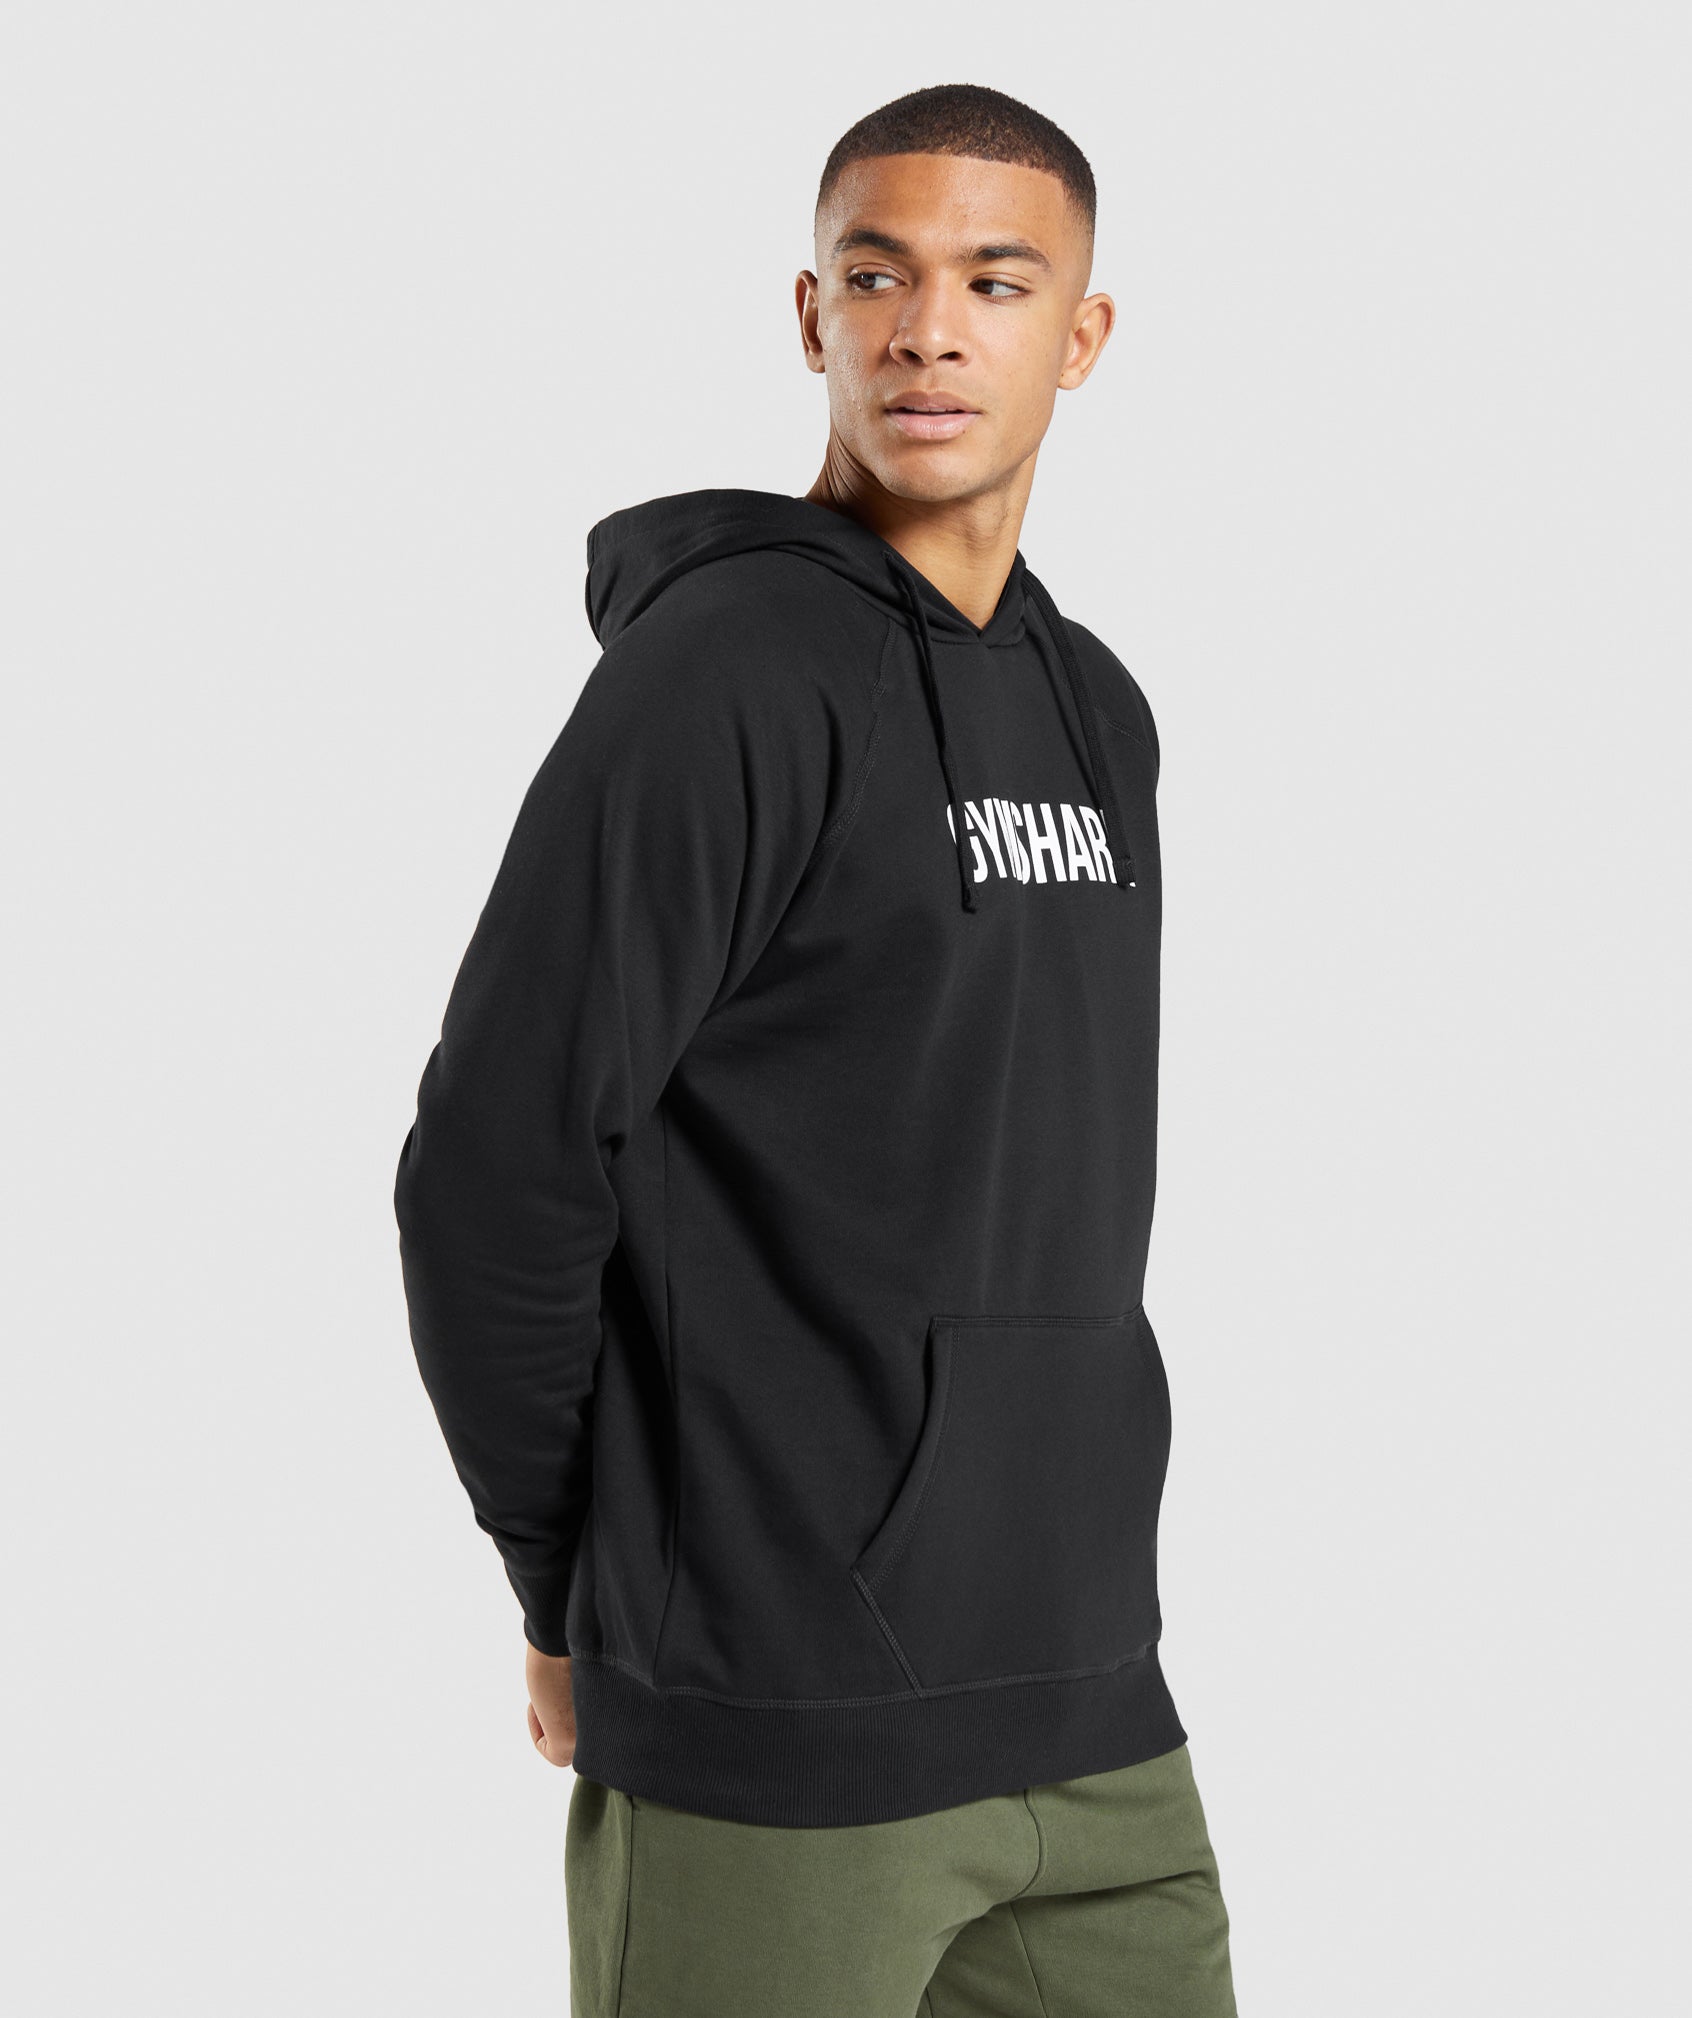 Apollo Hoodie in Black - view 3